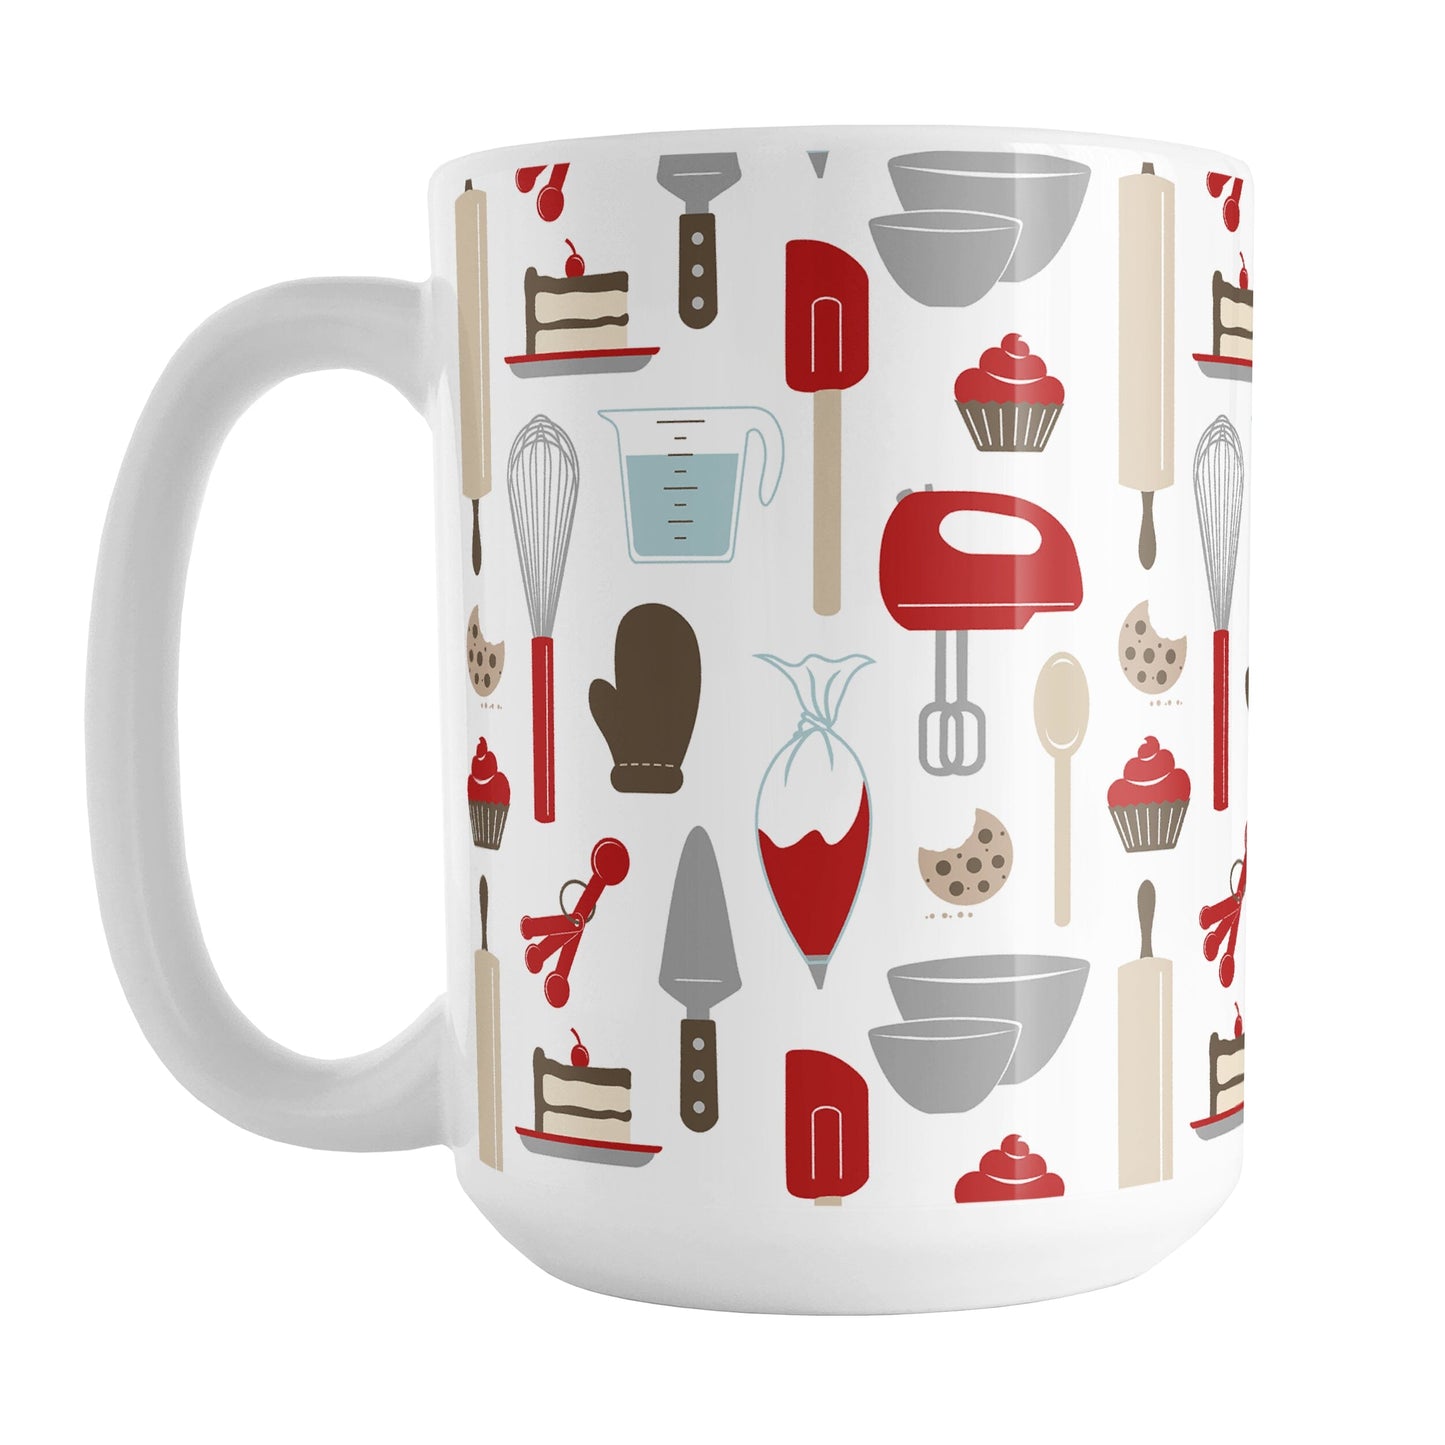 Red Baking Pattern Mug (15oz) at Amy's Coffee Mugs. A ceramic coffee mug designed with a pattern of baking tools like spatulas, whisks, mixers, bowls, and spoons, with cookies, cupcakes, and cake all in a red, gray, brown, and beige color scheme that wraps around the mug. 